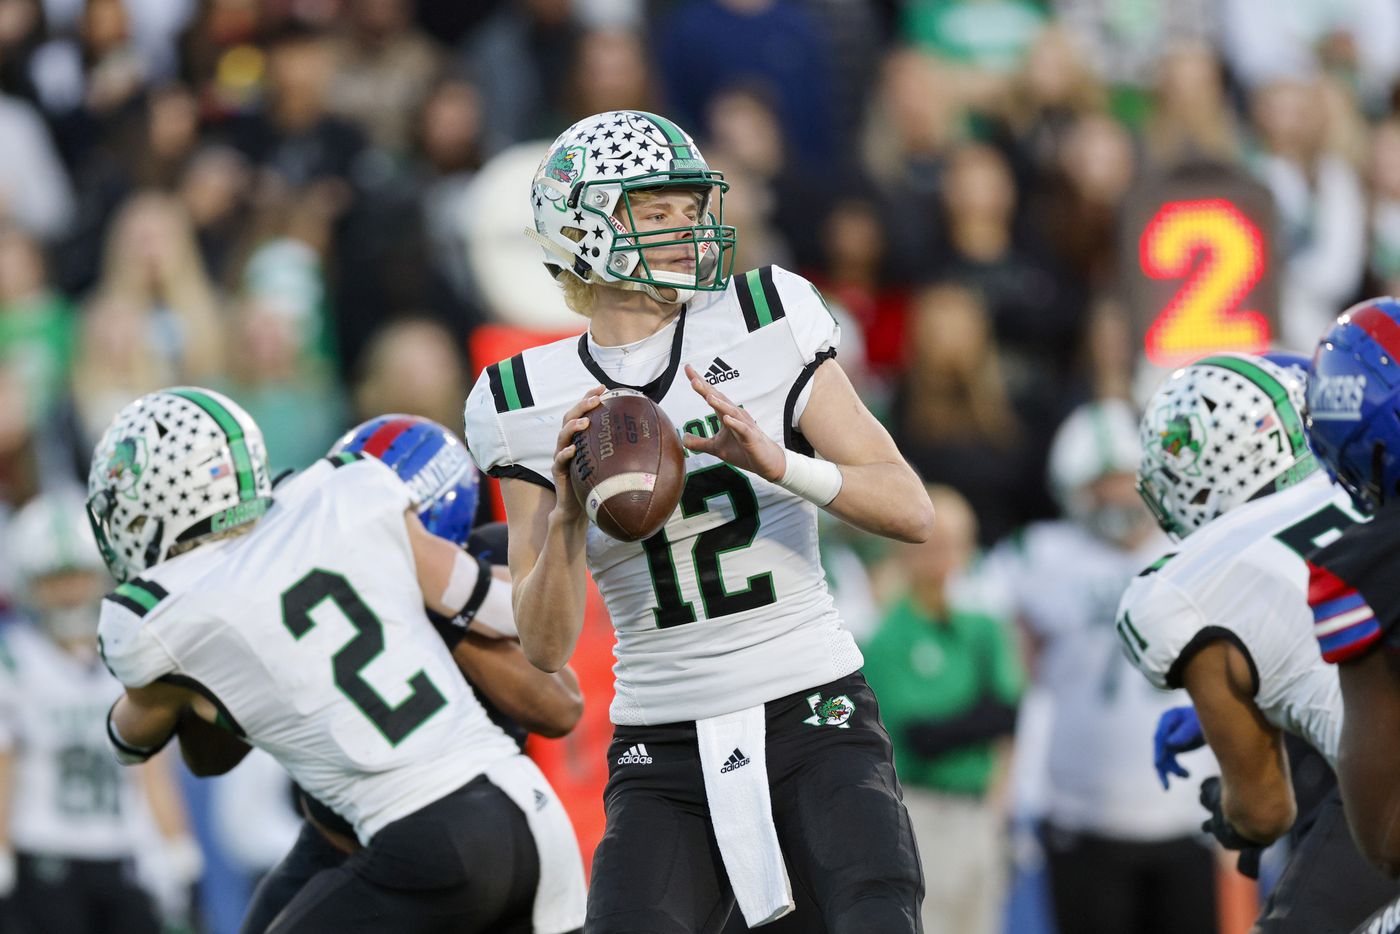 Southlake Carroll quarterback Kaden Anderson (12) looks to pass during the first half of their Class 6A Division I state semifinal playoff game against Duncanville at McKinney ISD Stadium in McKinney, Texas, Saturday, Dec. 11, 2021. (Elias Valverde II/The Dallas Morning News)